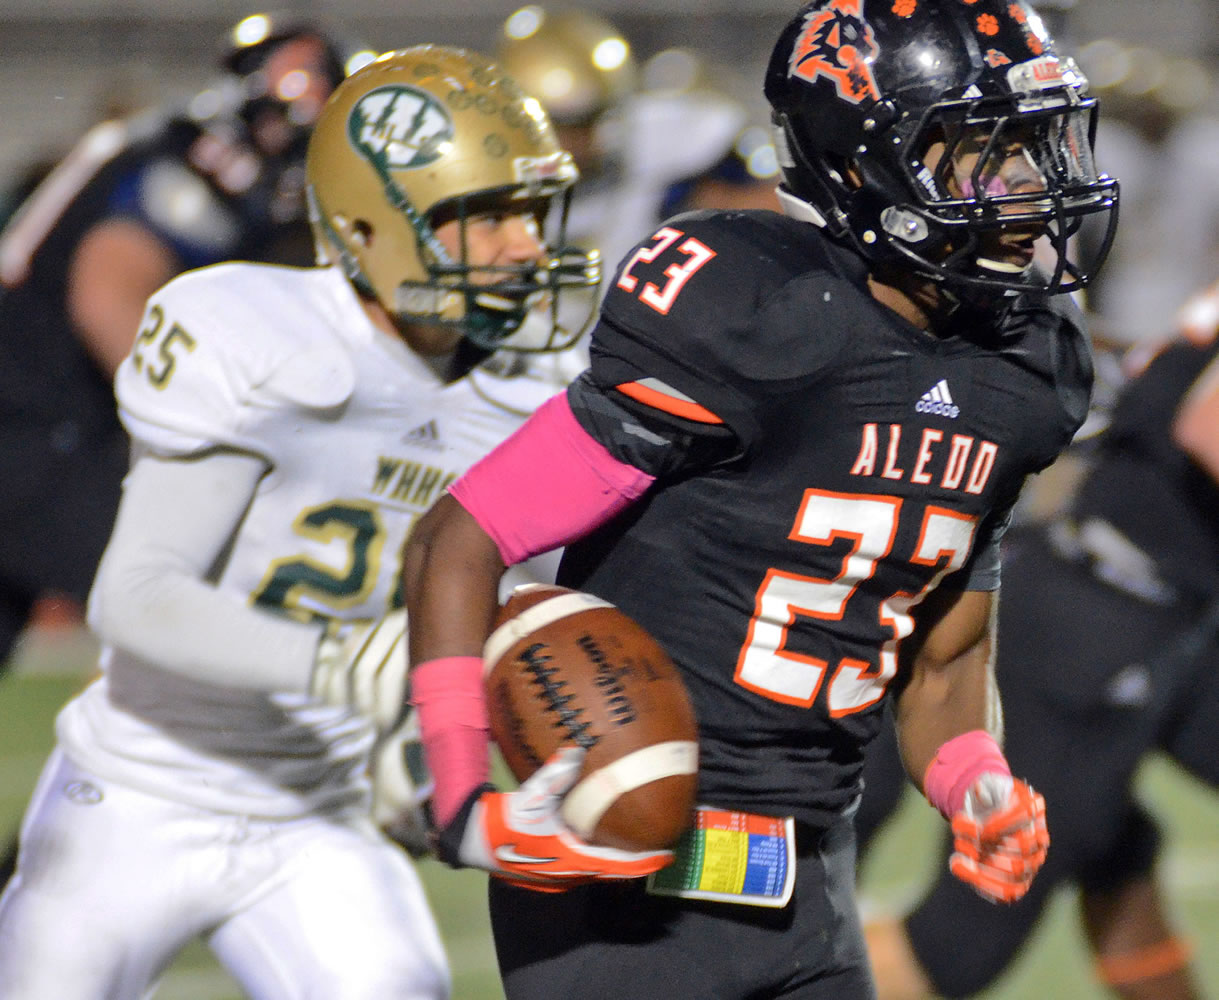 Jess Anders (23) races past Western Hills's Desmond Mize to score one of many Aledo touchdowns Friday.